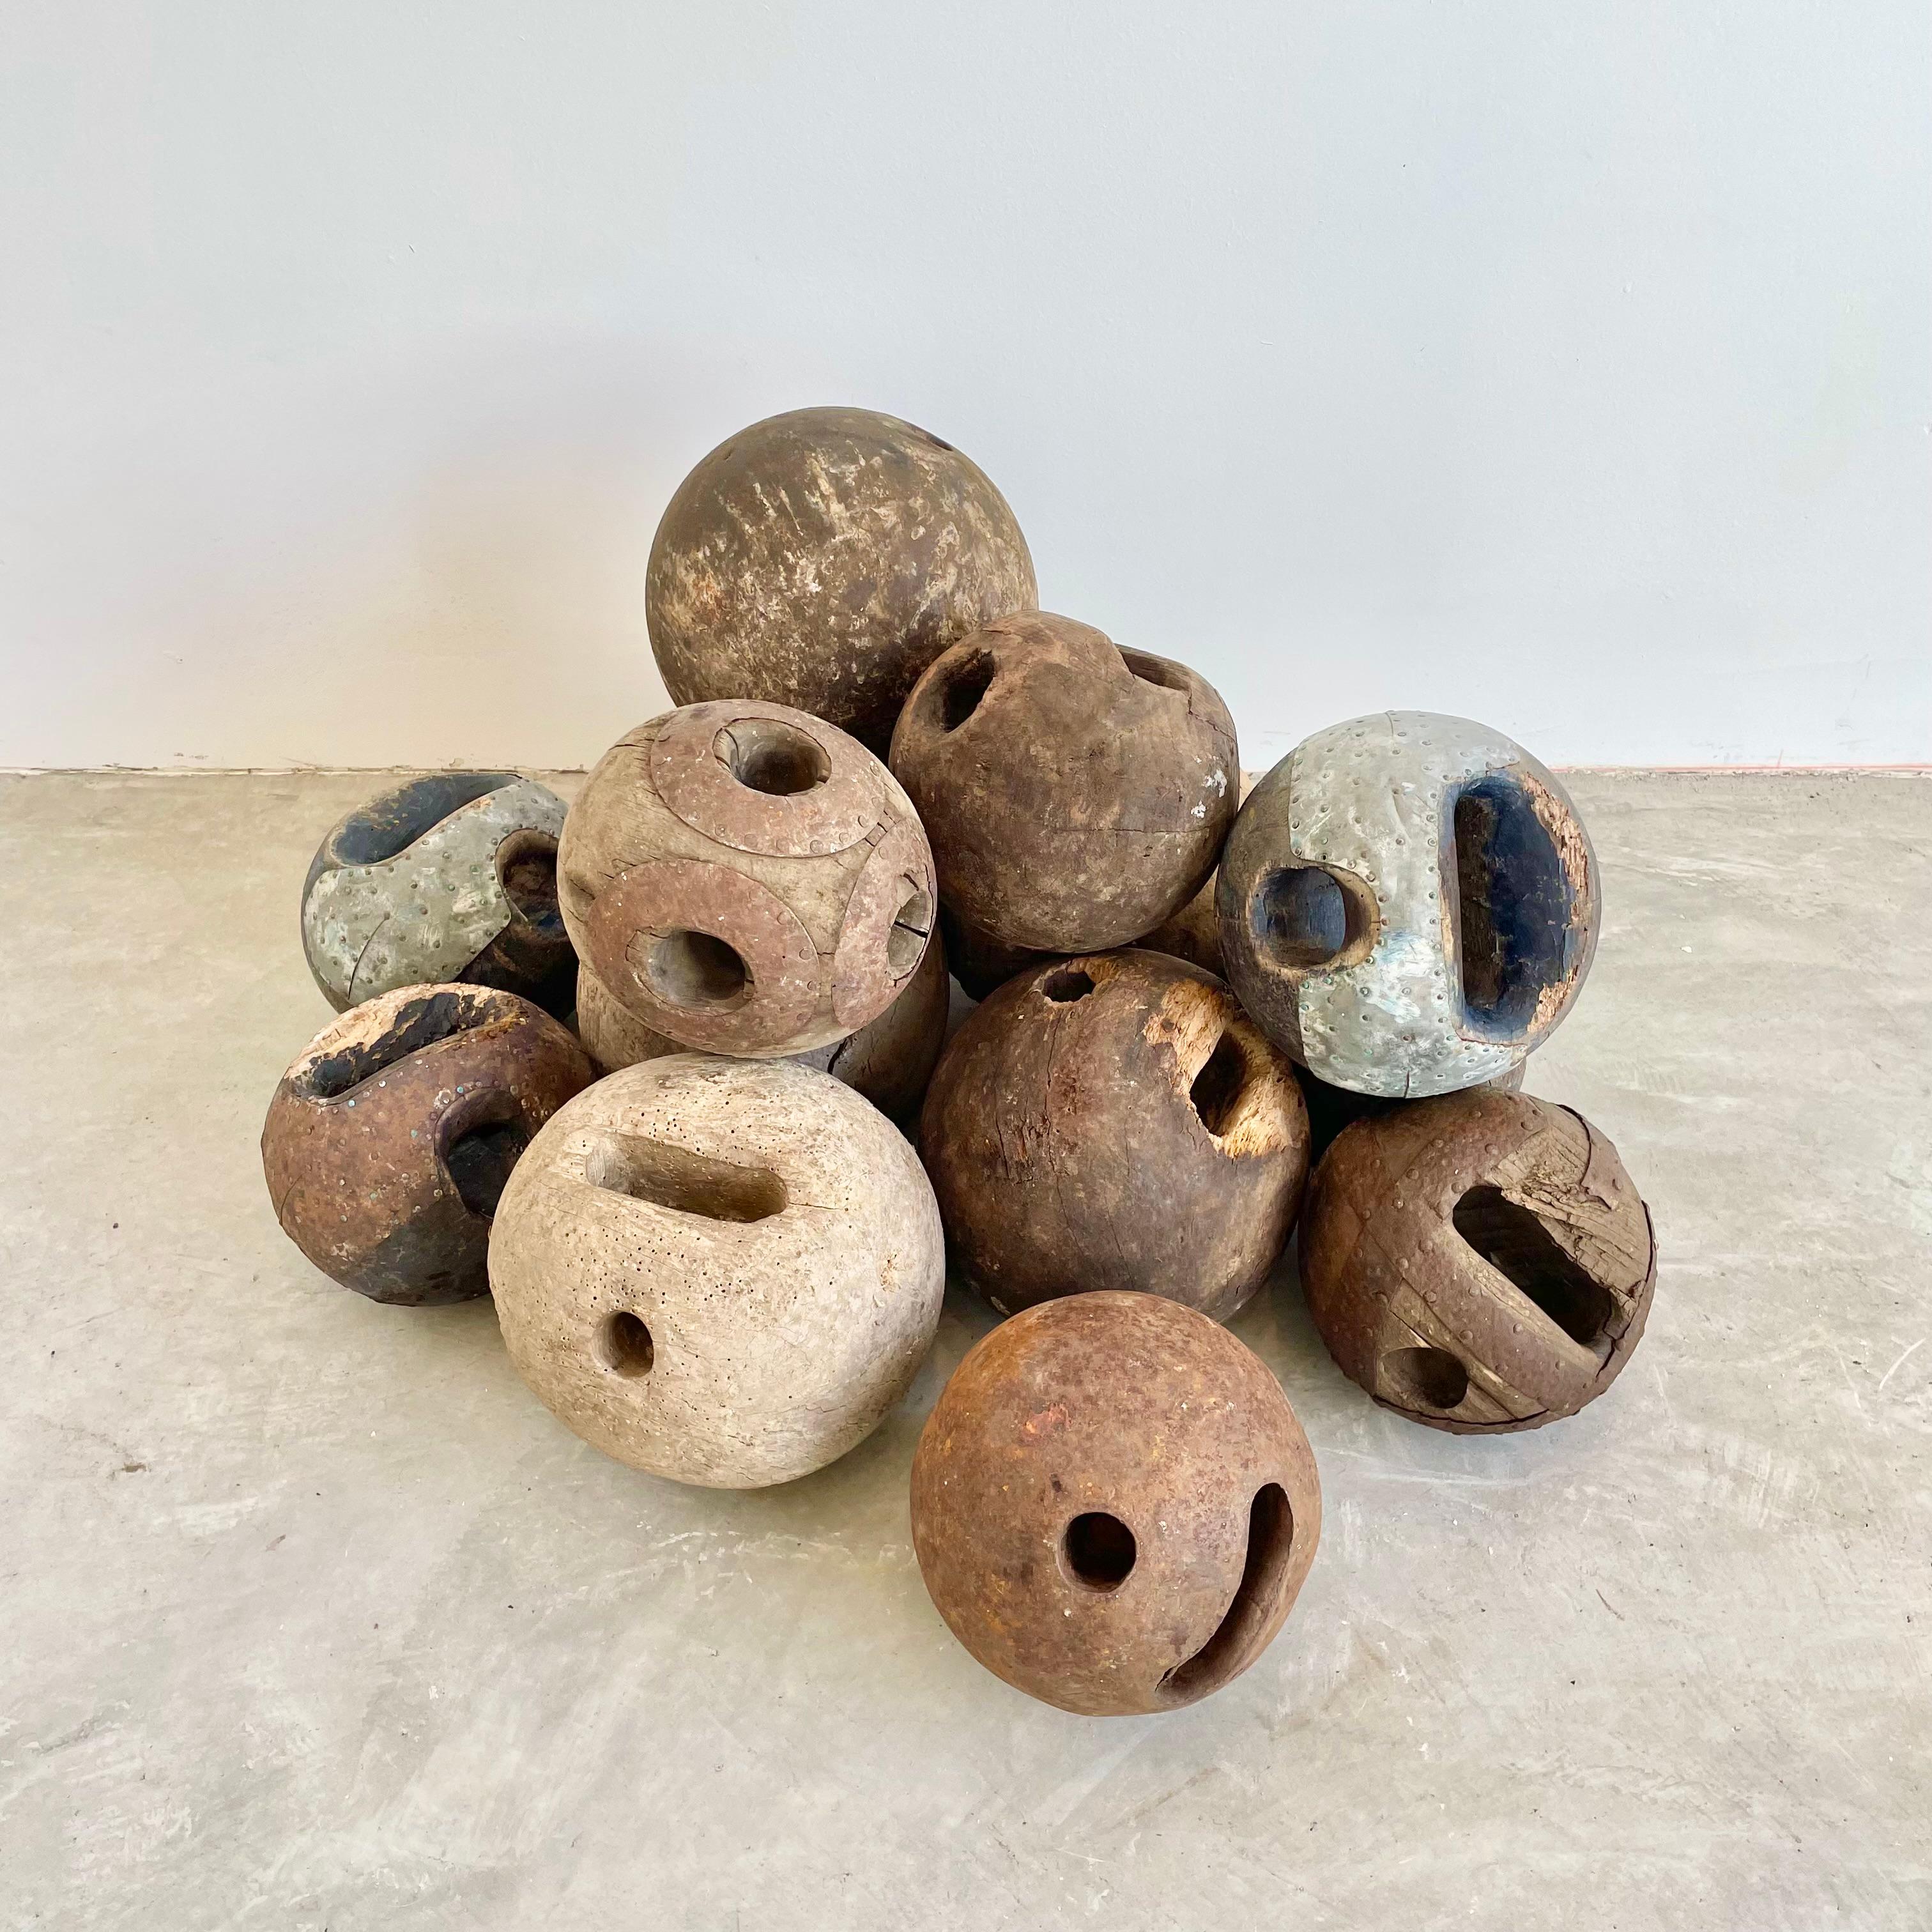 Hand made wooden bowling balls with thumb and finger grips carved out of the wood. Slightly varying size and patina for each ball as well as some being painted blue while others are in a natural wood. Amazing presence and depth that only gets better